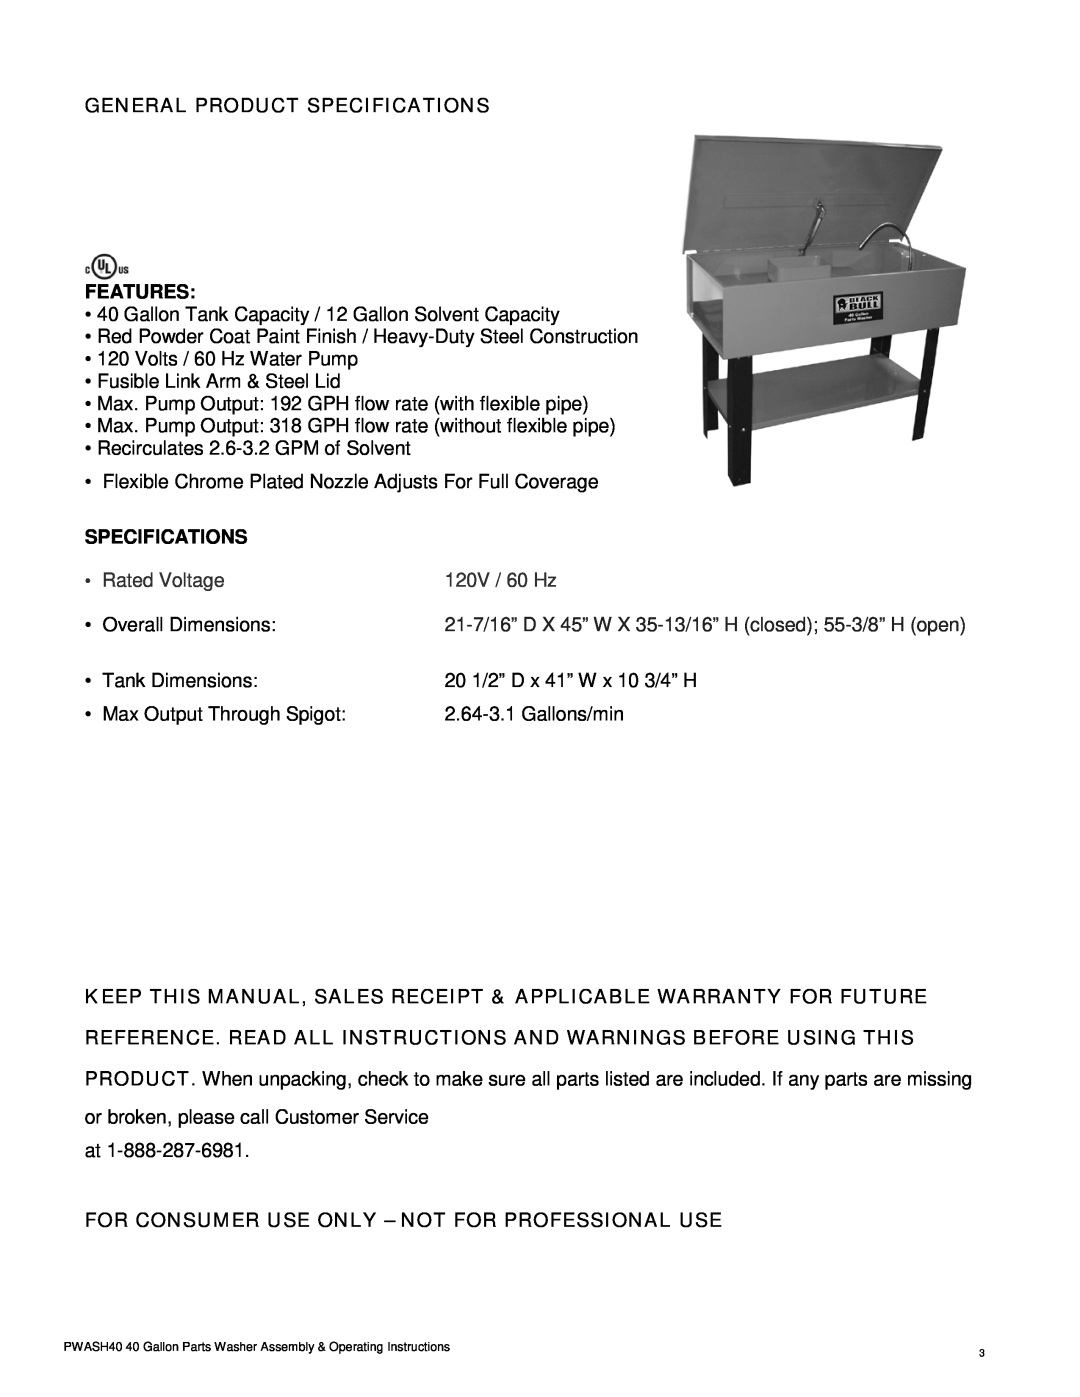 Buffalo Technology PWASH40201407 General Product Specifications Features, For Consumer Use Only - Not For Professional Use 